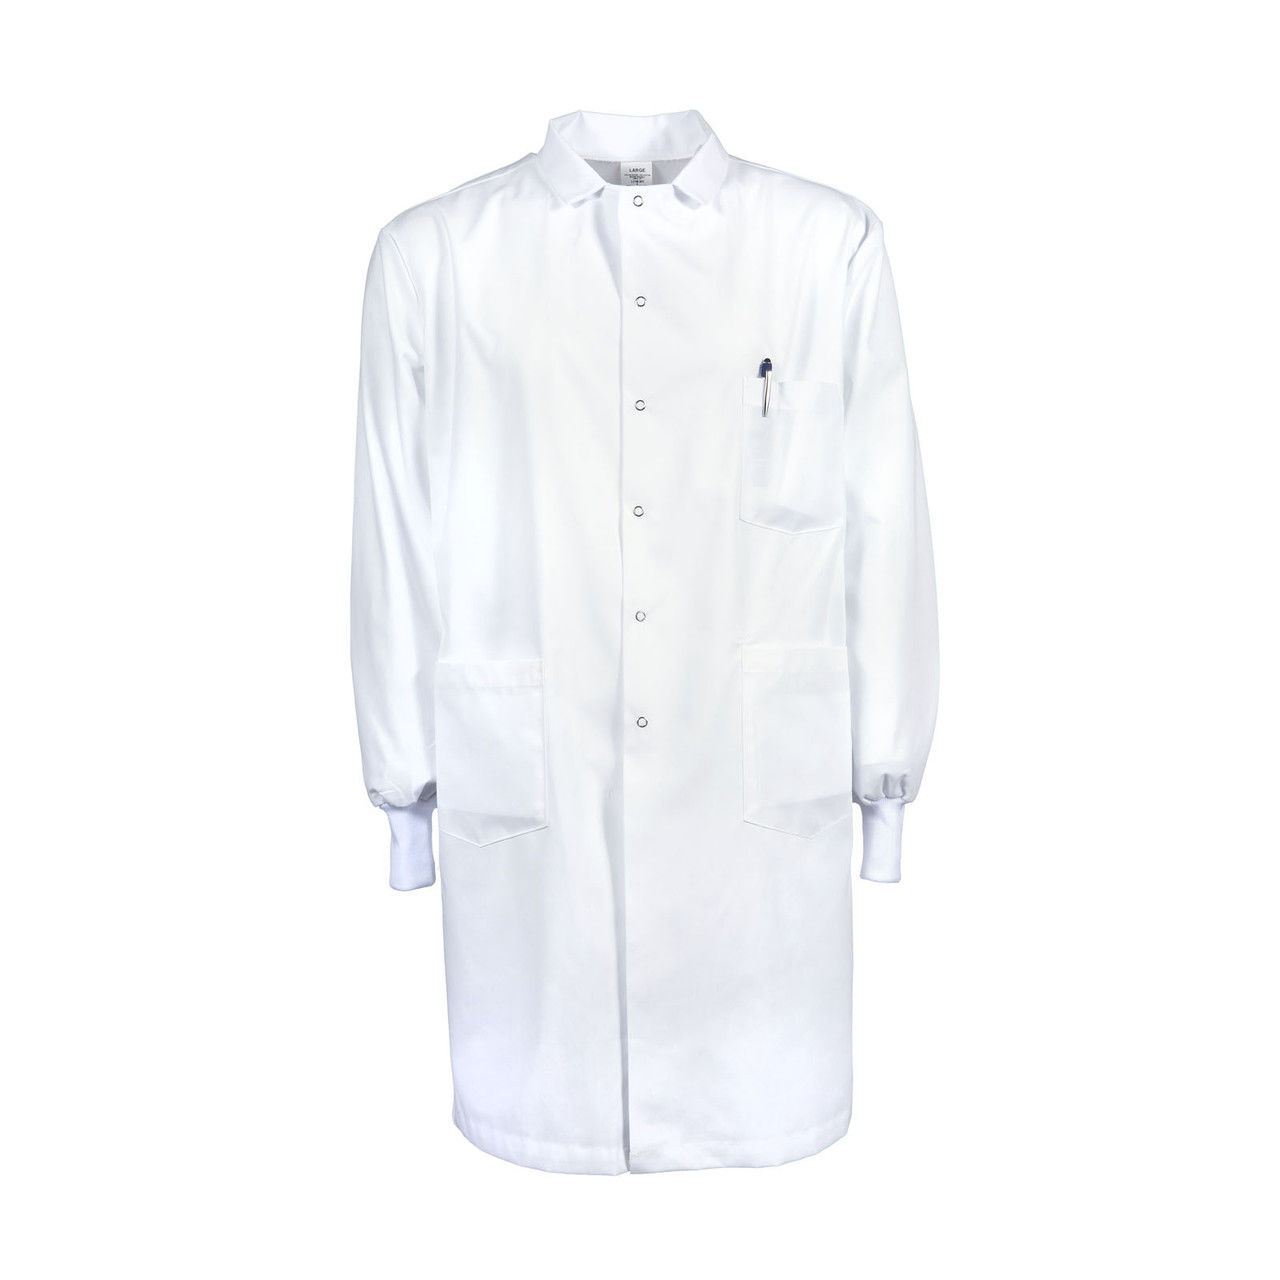 Does the Knit Cuff Lab coat feature lab coats with cuffs closure details?